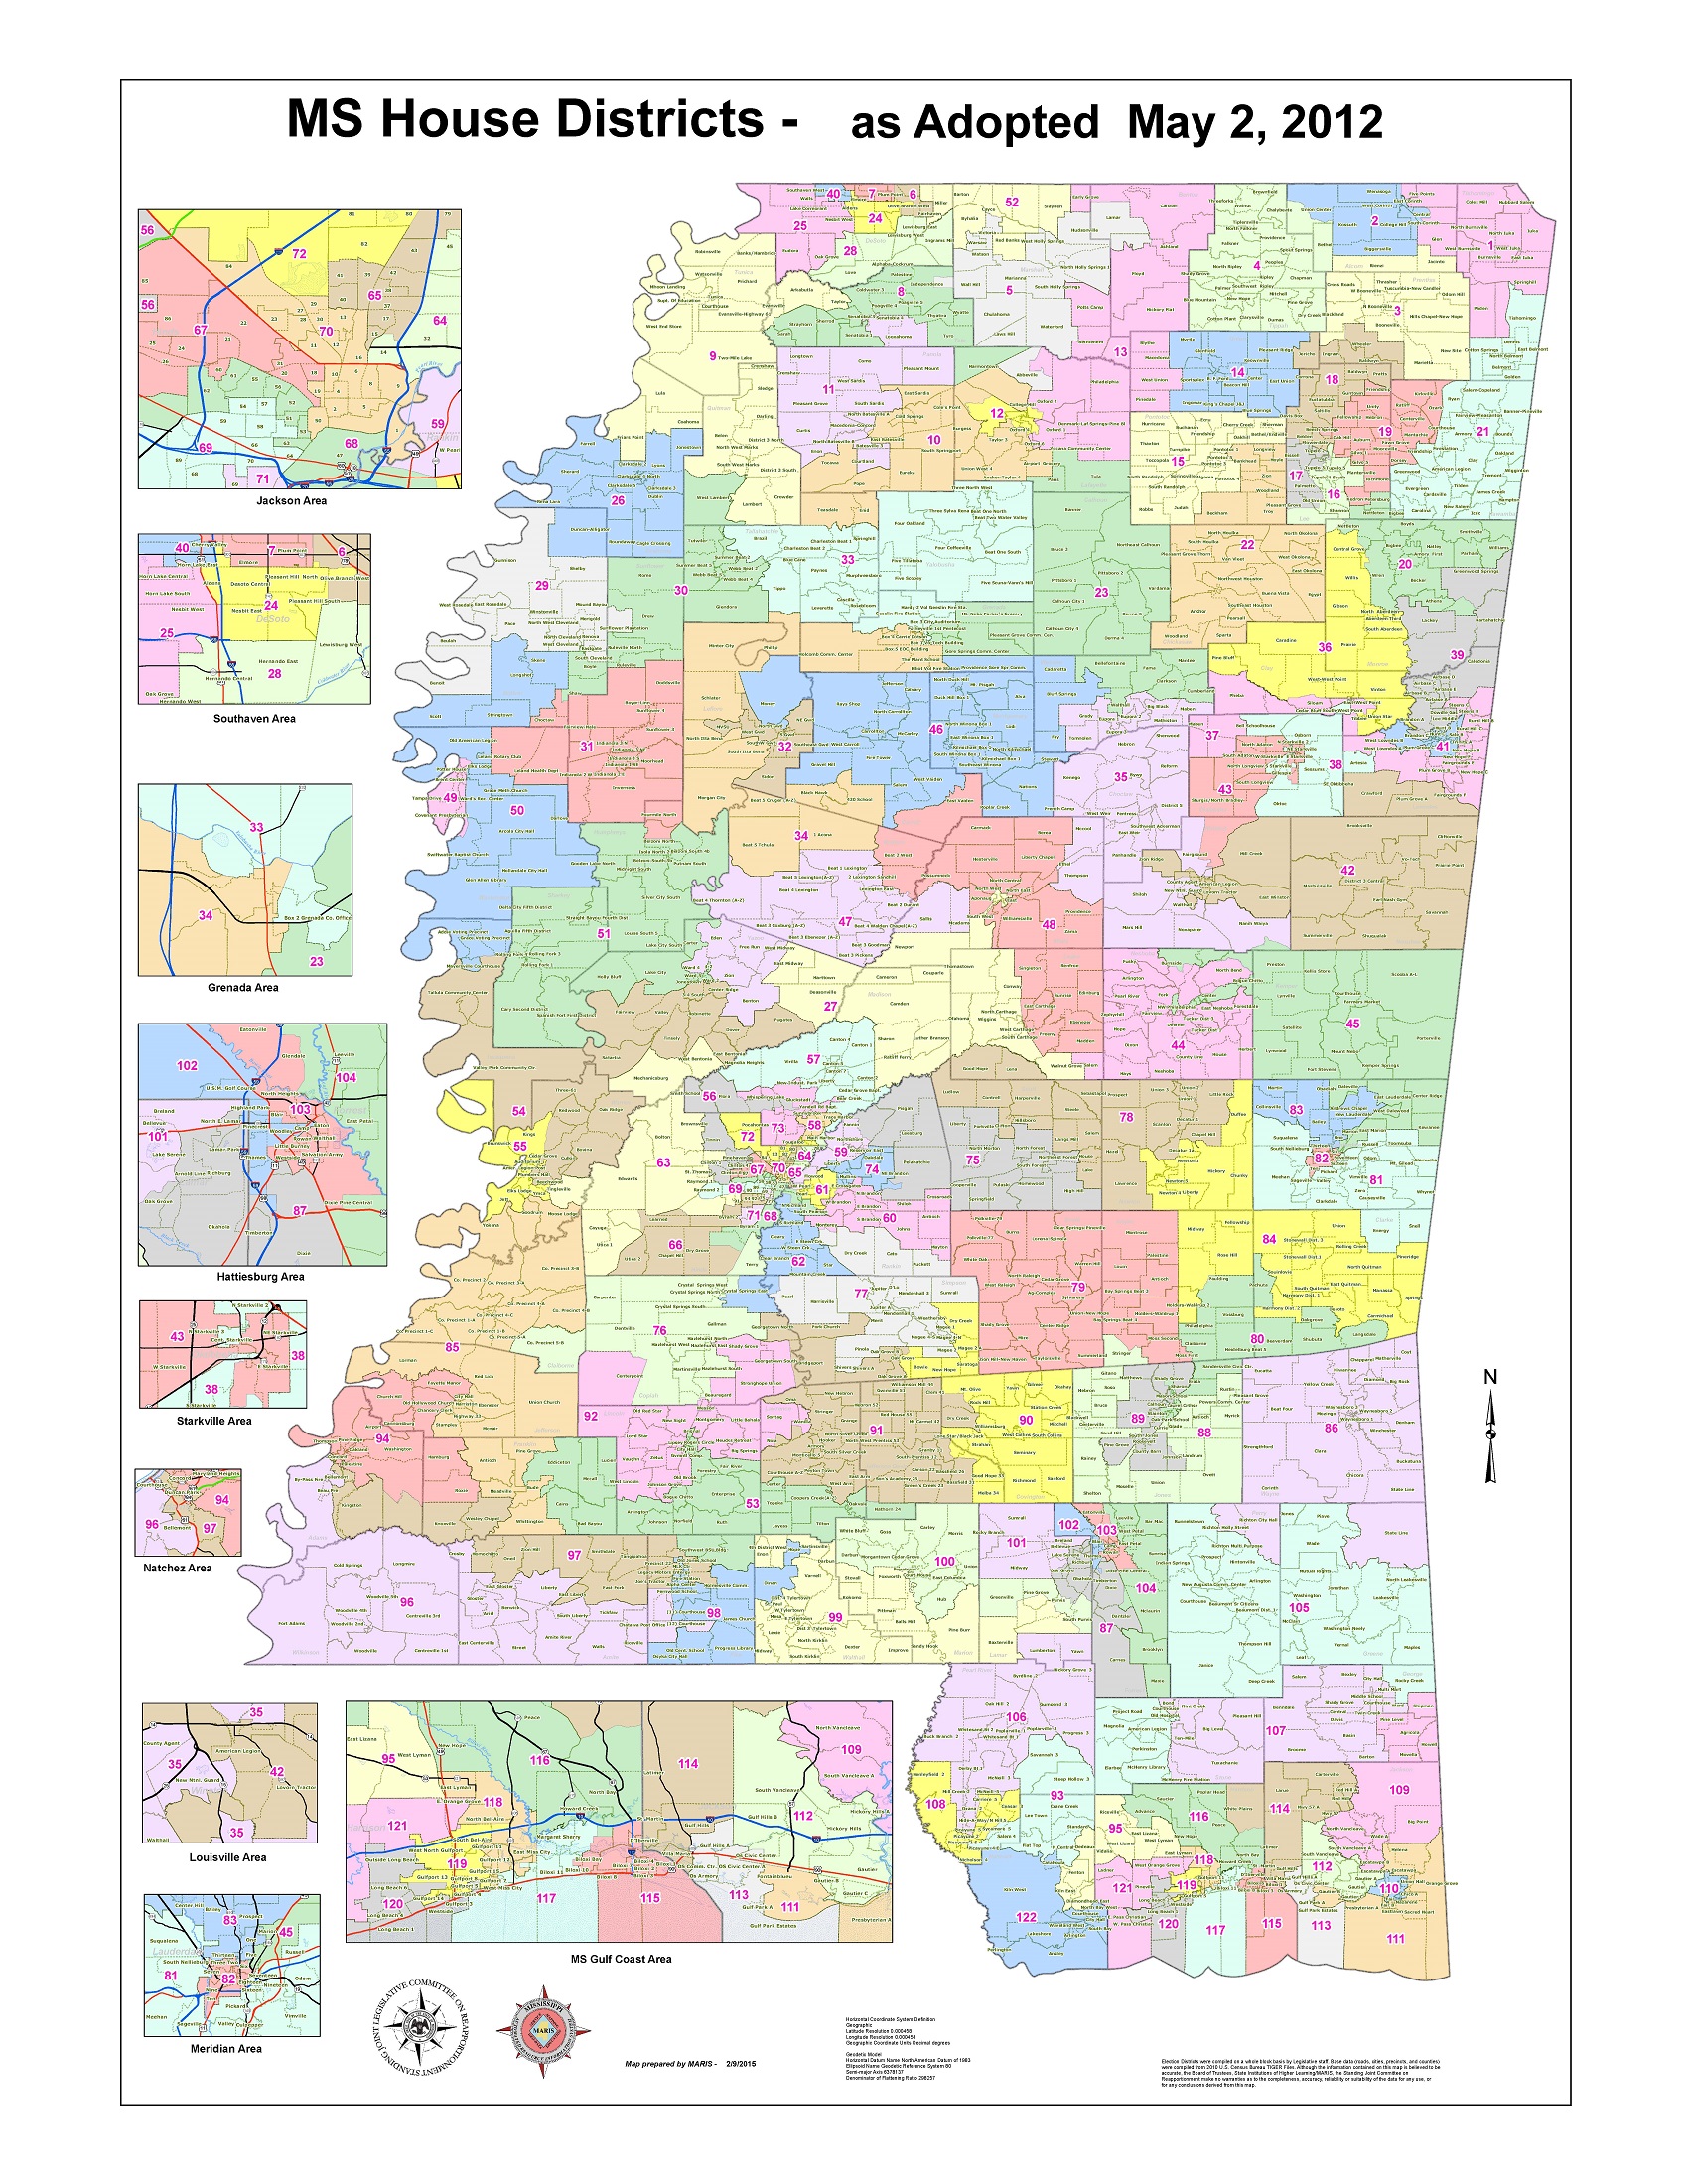 State redistricting information for Mississippi